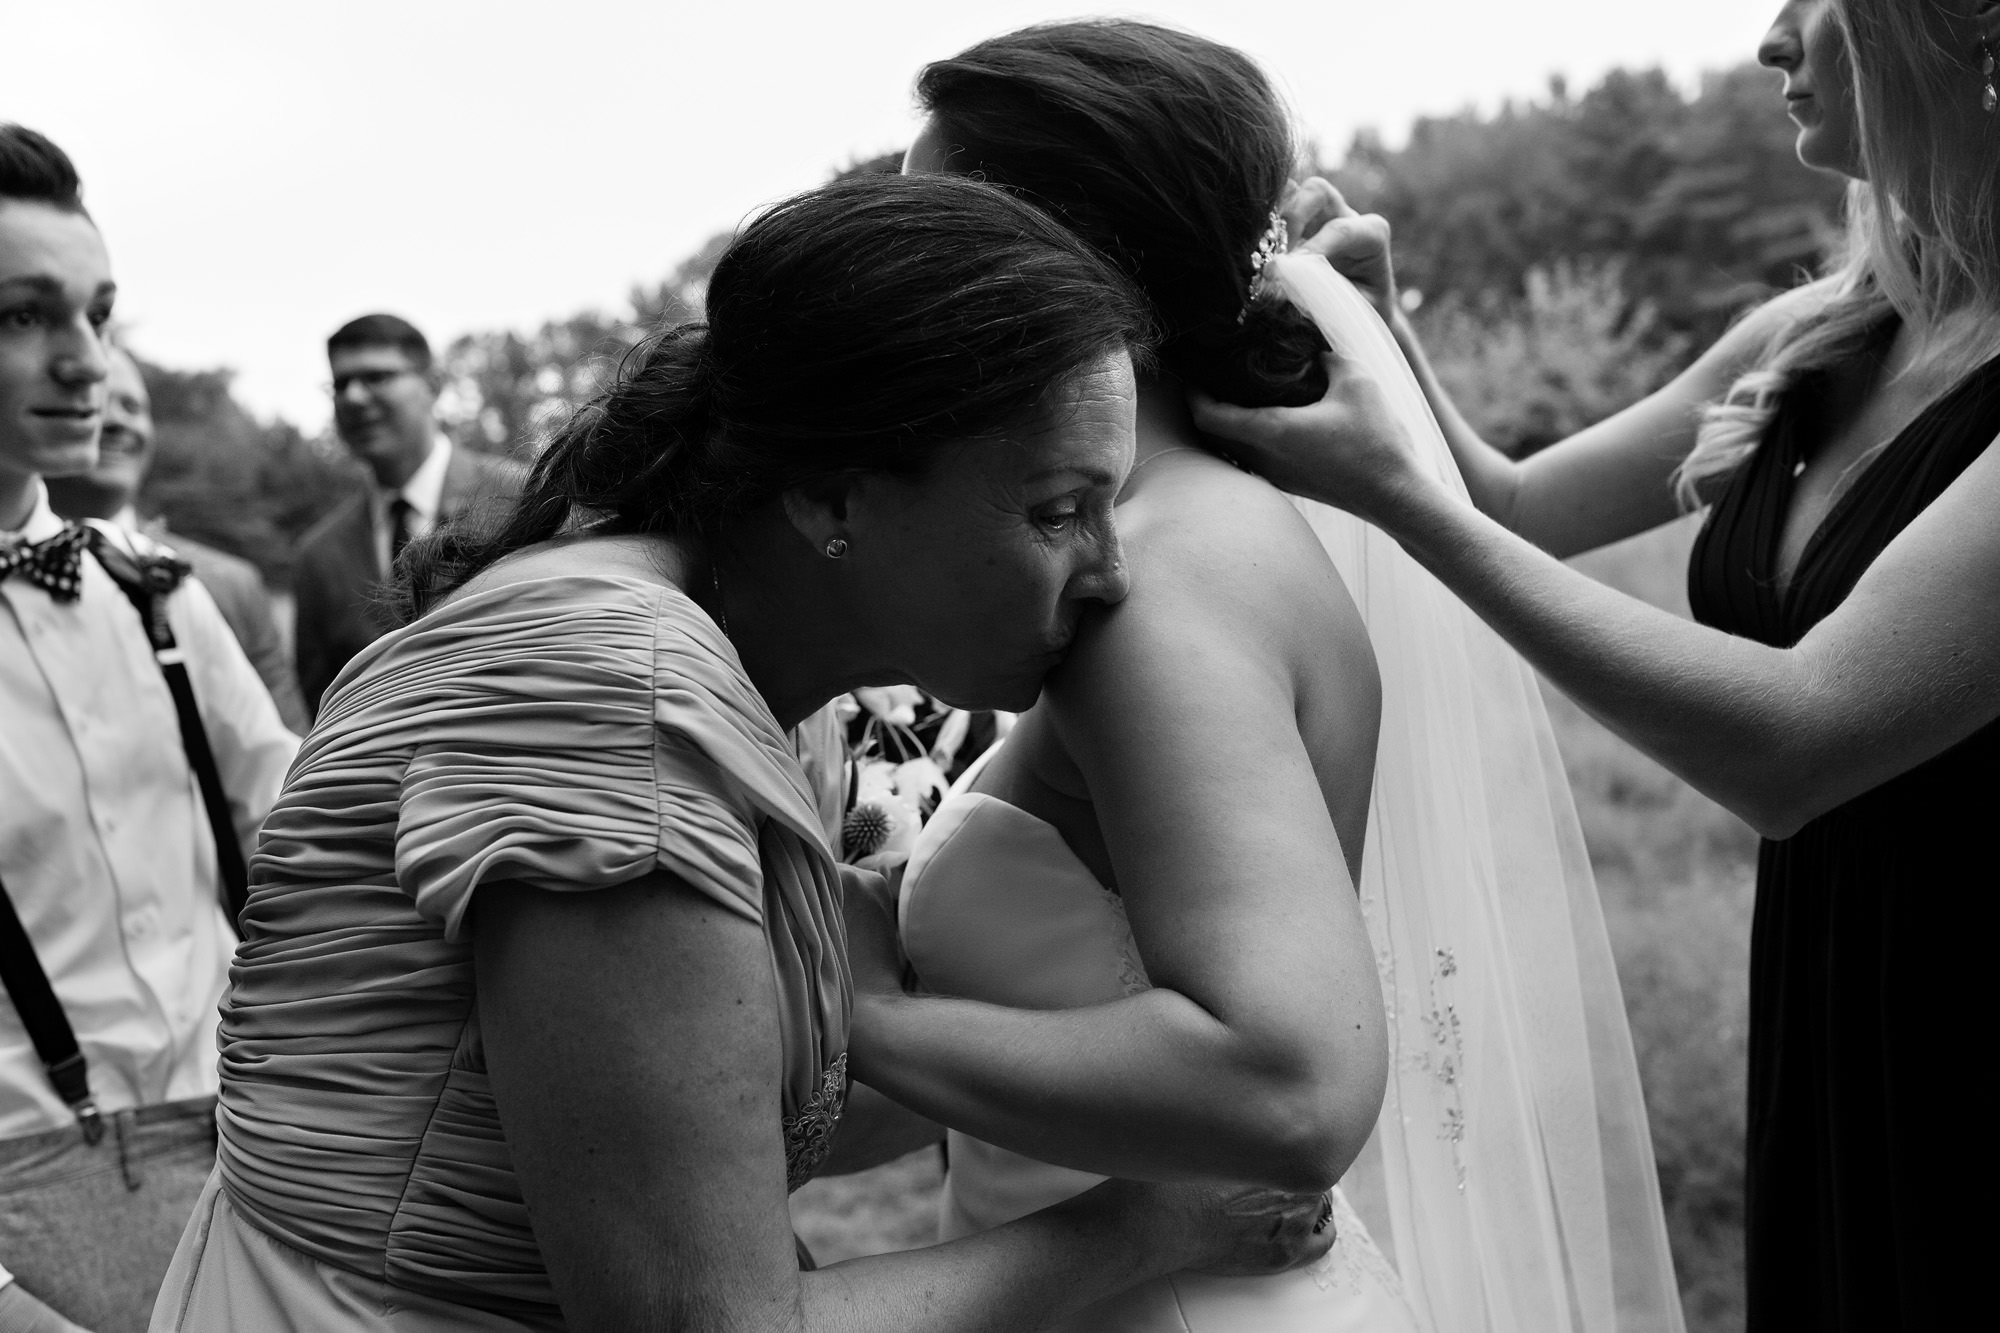 A mother of the bride and the bride share an intimate moment after the wedding ceremony